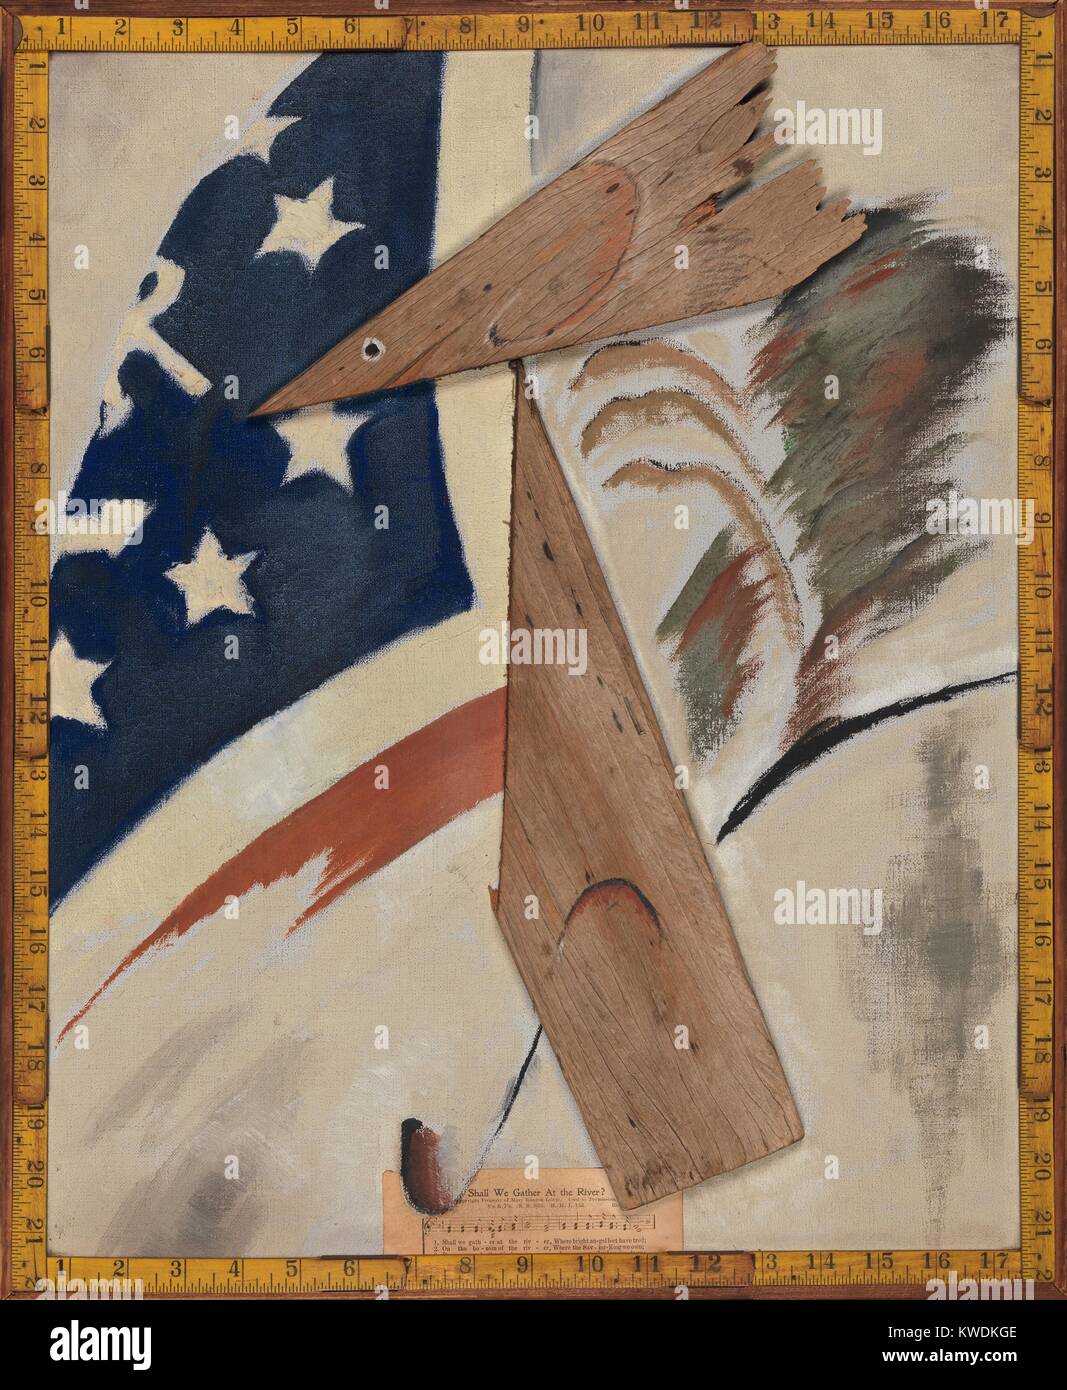 PORTRAIT OF RALPH DUSENBERRY, by Arthur Dove, 1924, American painting, mixed media collage. Dove created symbolic portraits of friends using found materials. Dove’s neighbor, an architect (rulers), lived on a houseboat (nautical flag), sang a favorite hymn (sheet music), and lived near weather wood on the seashore (BSLOC 2017 7 79) Stock Photo